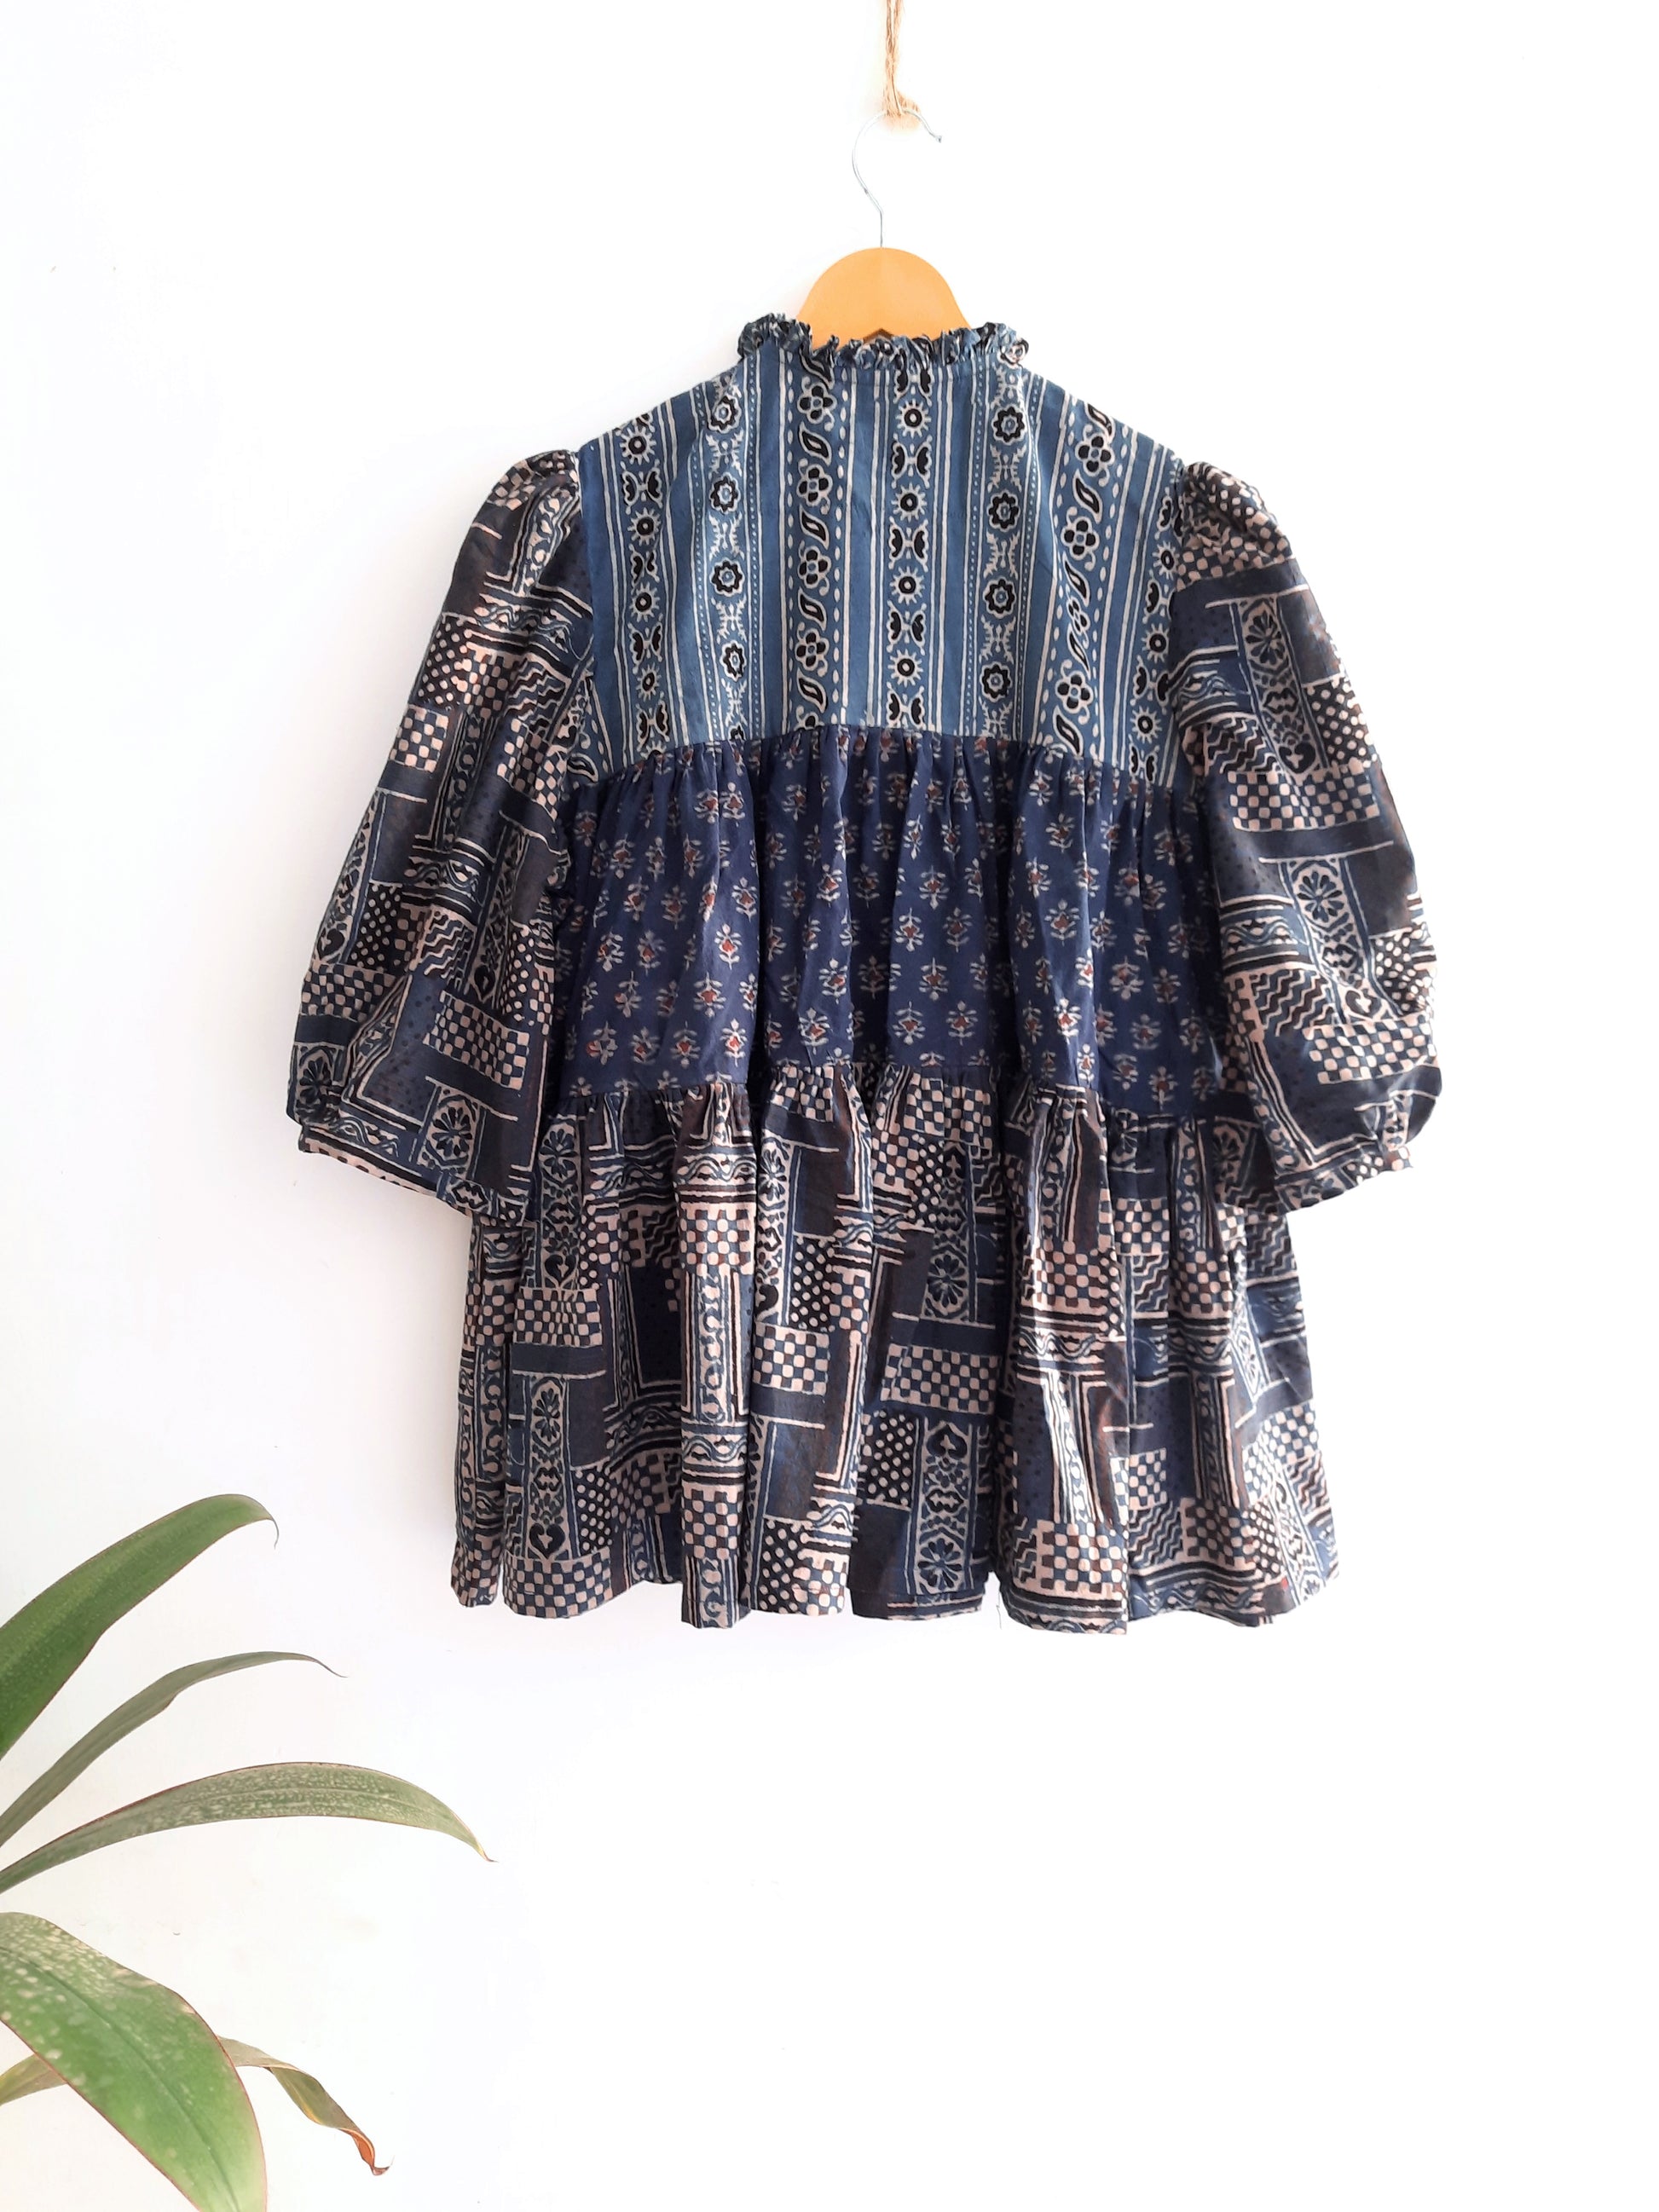 Indigo dyed multi tiered puffed sleeves shirt, Handmade indigo shirt, Comfortable indigo dyed ajrakh shirt for her